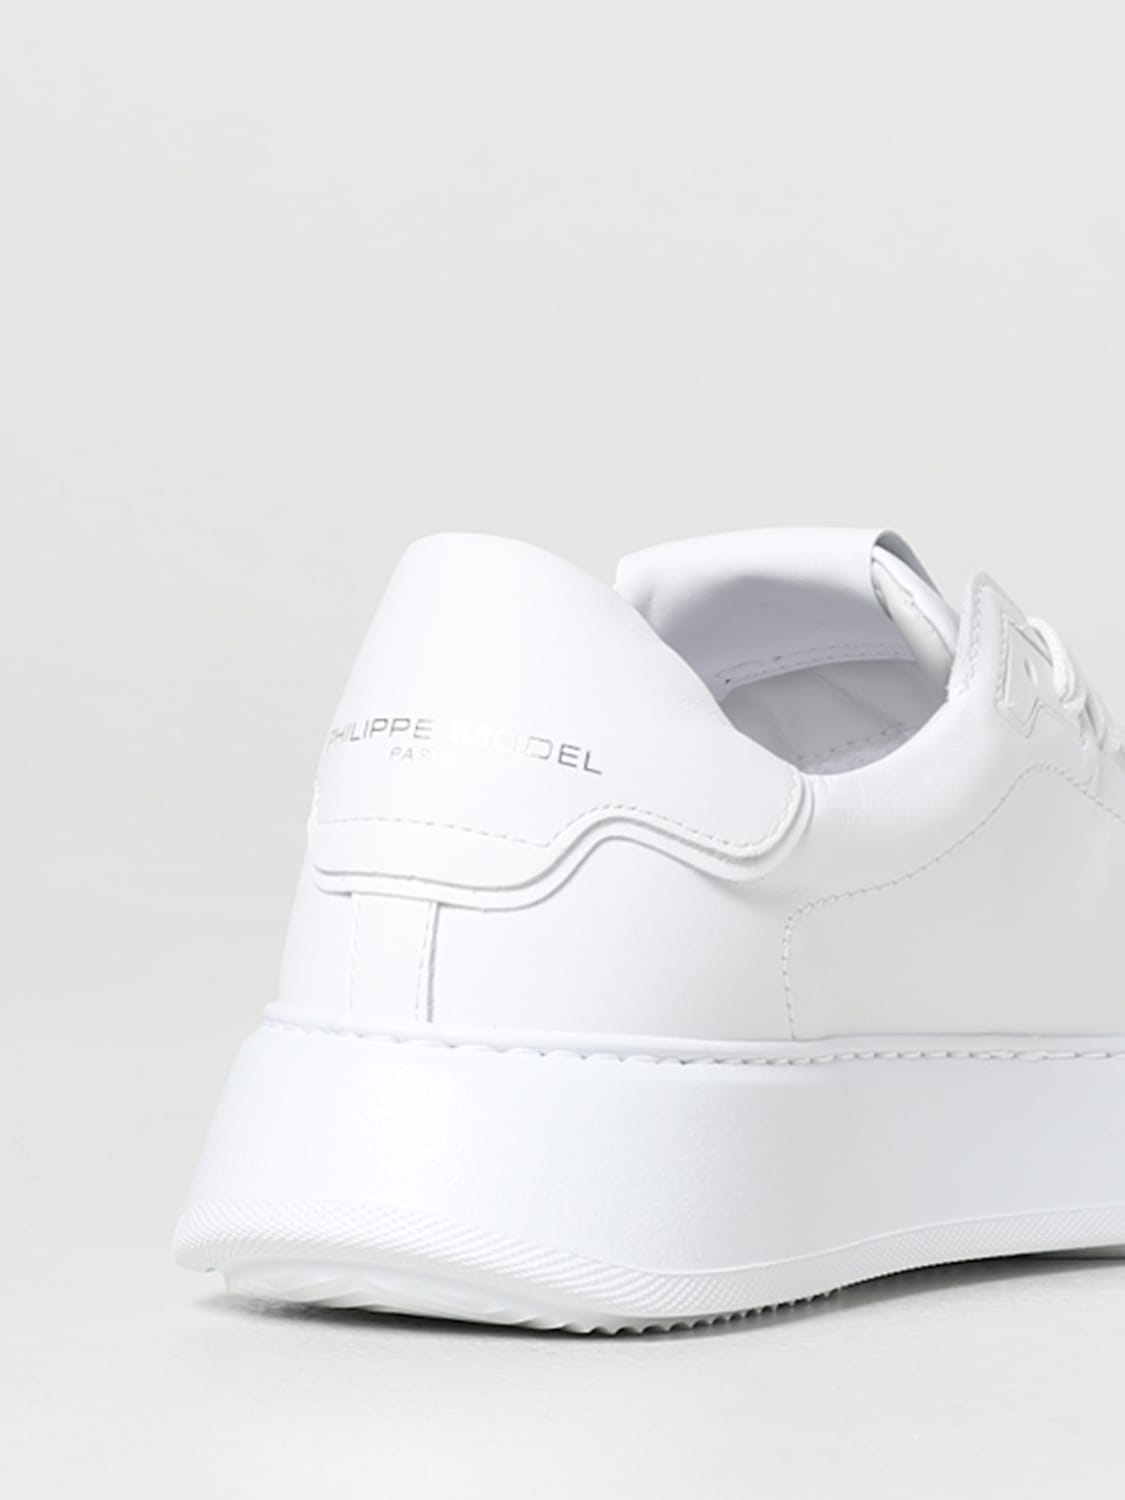 Trainers Philippe Model: Philippe Model trainers for men white 1 2